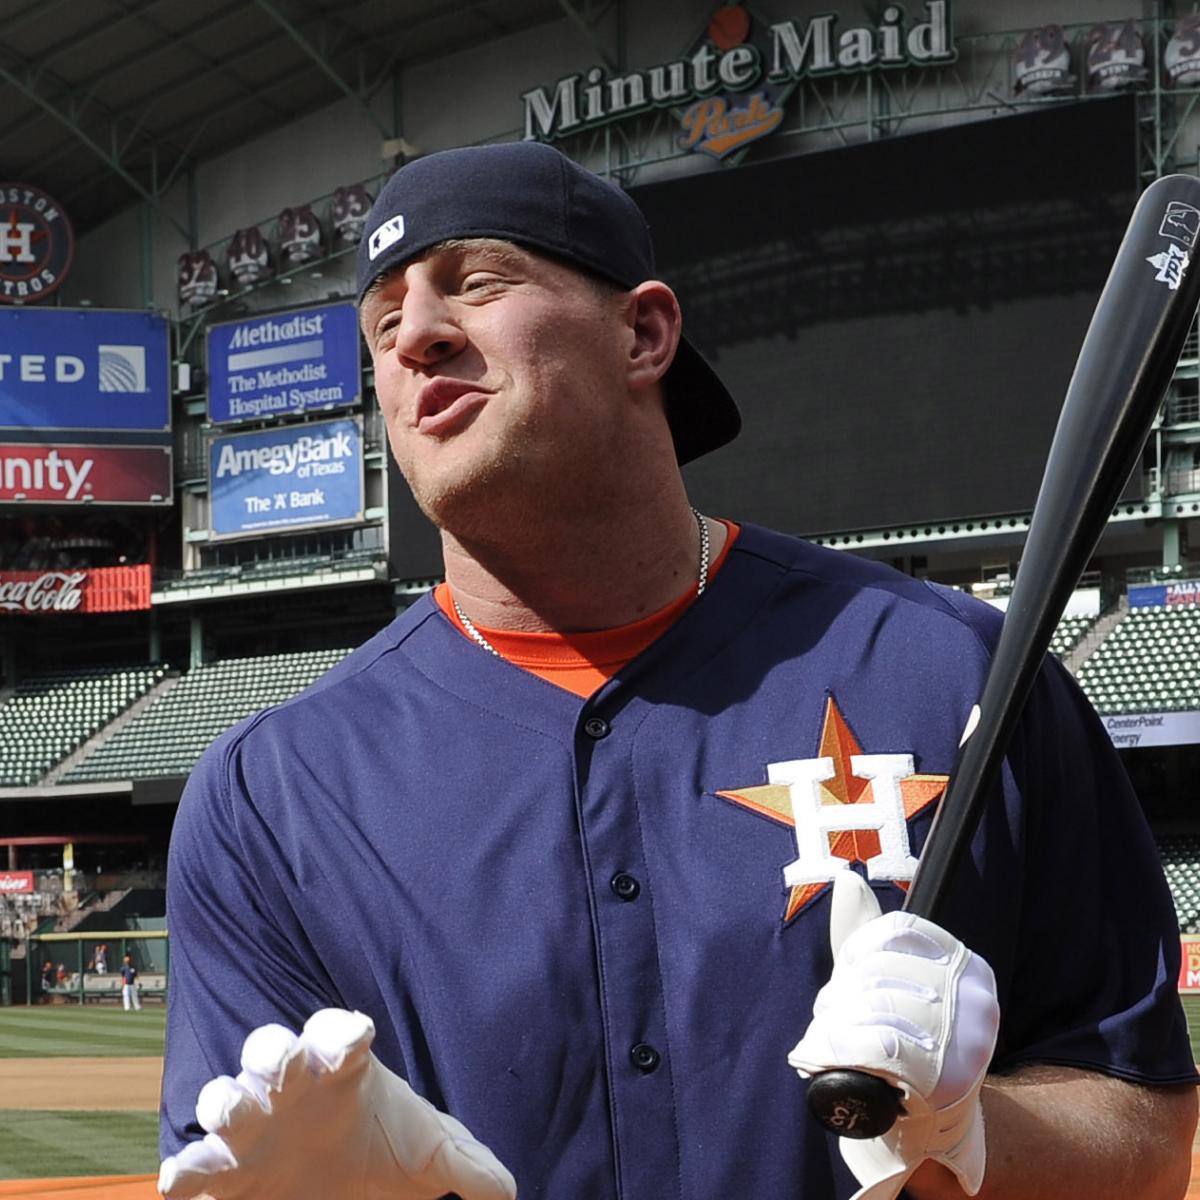 J.J. Watt will throw out first pitch in Game 3 at Minute Maid